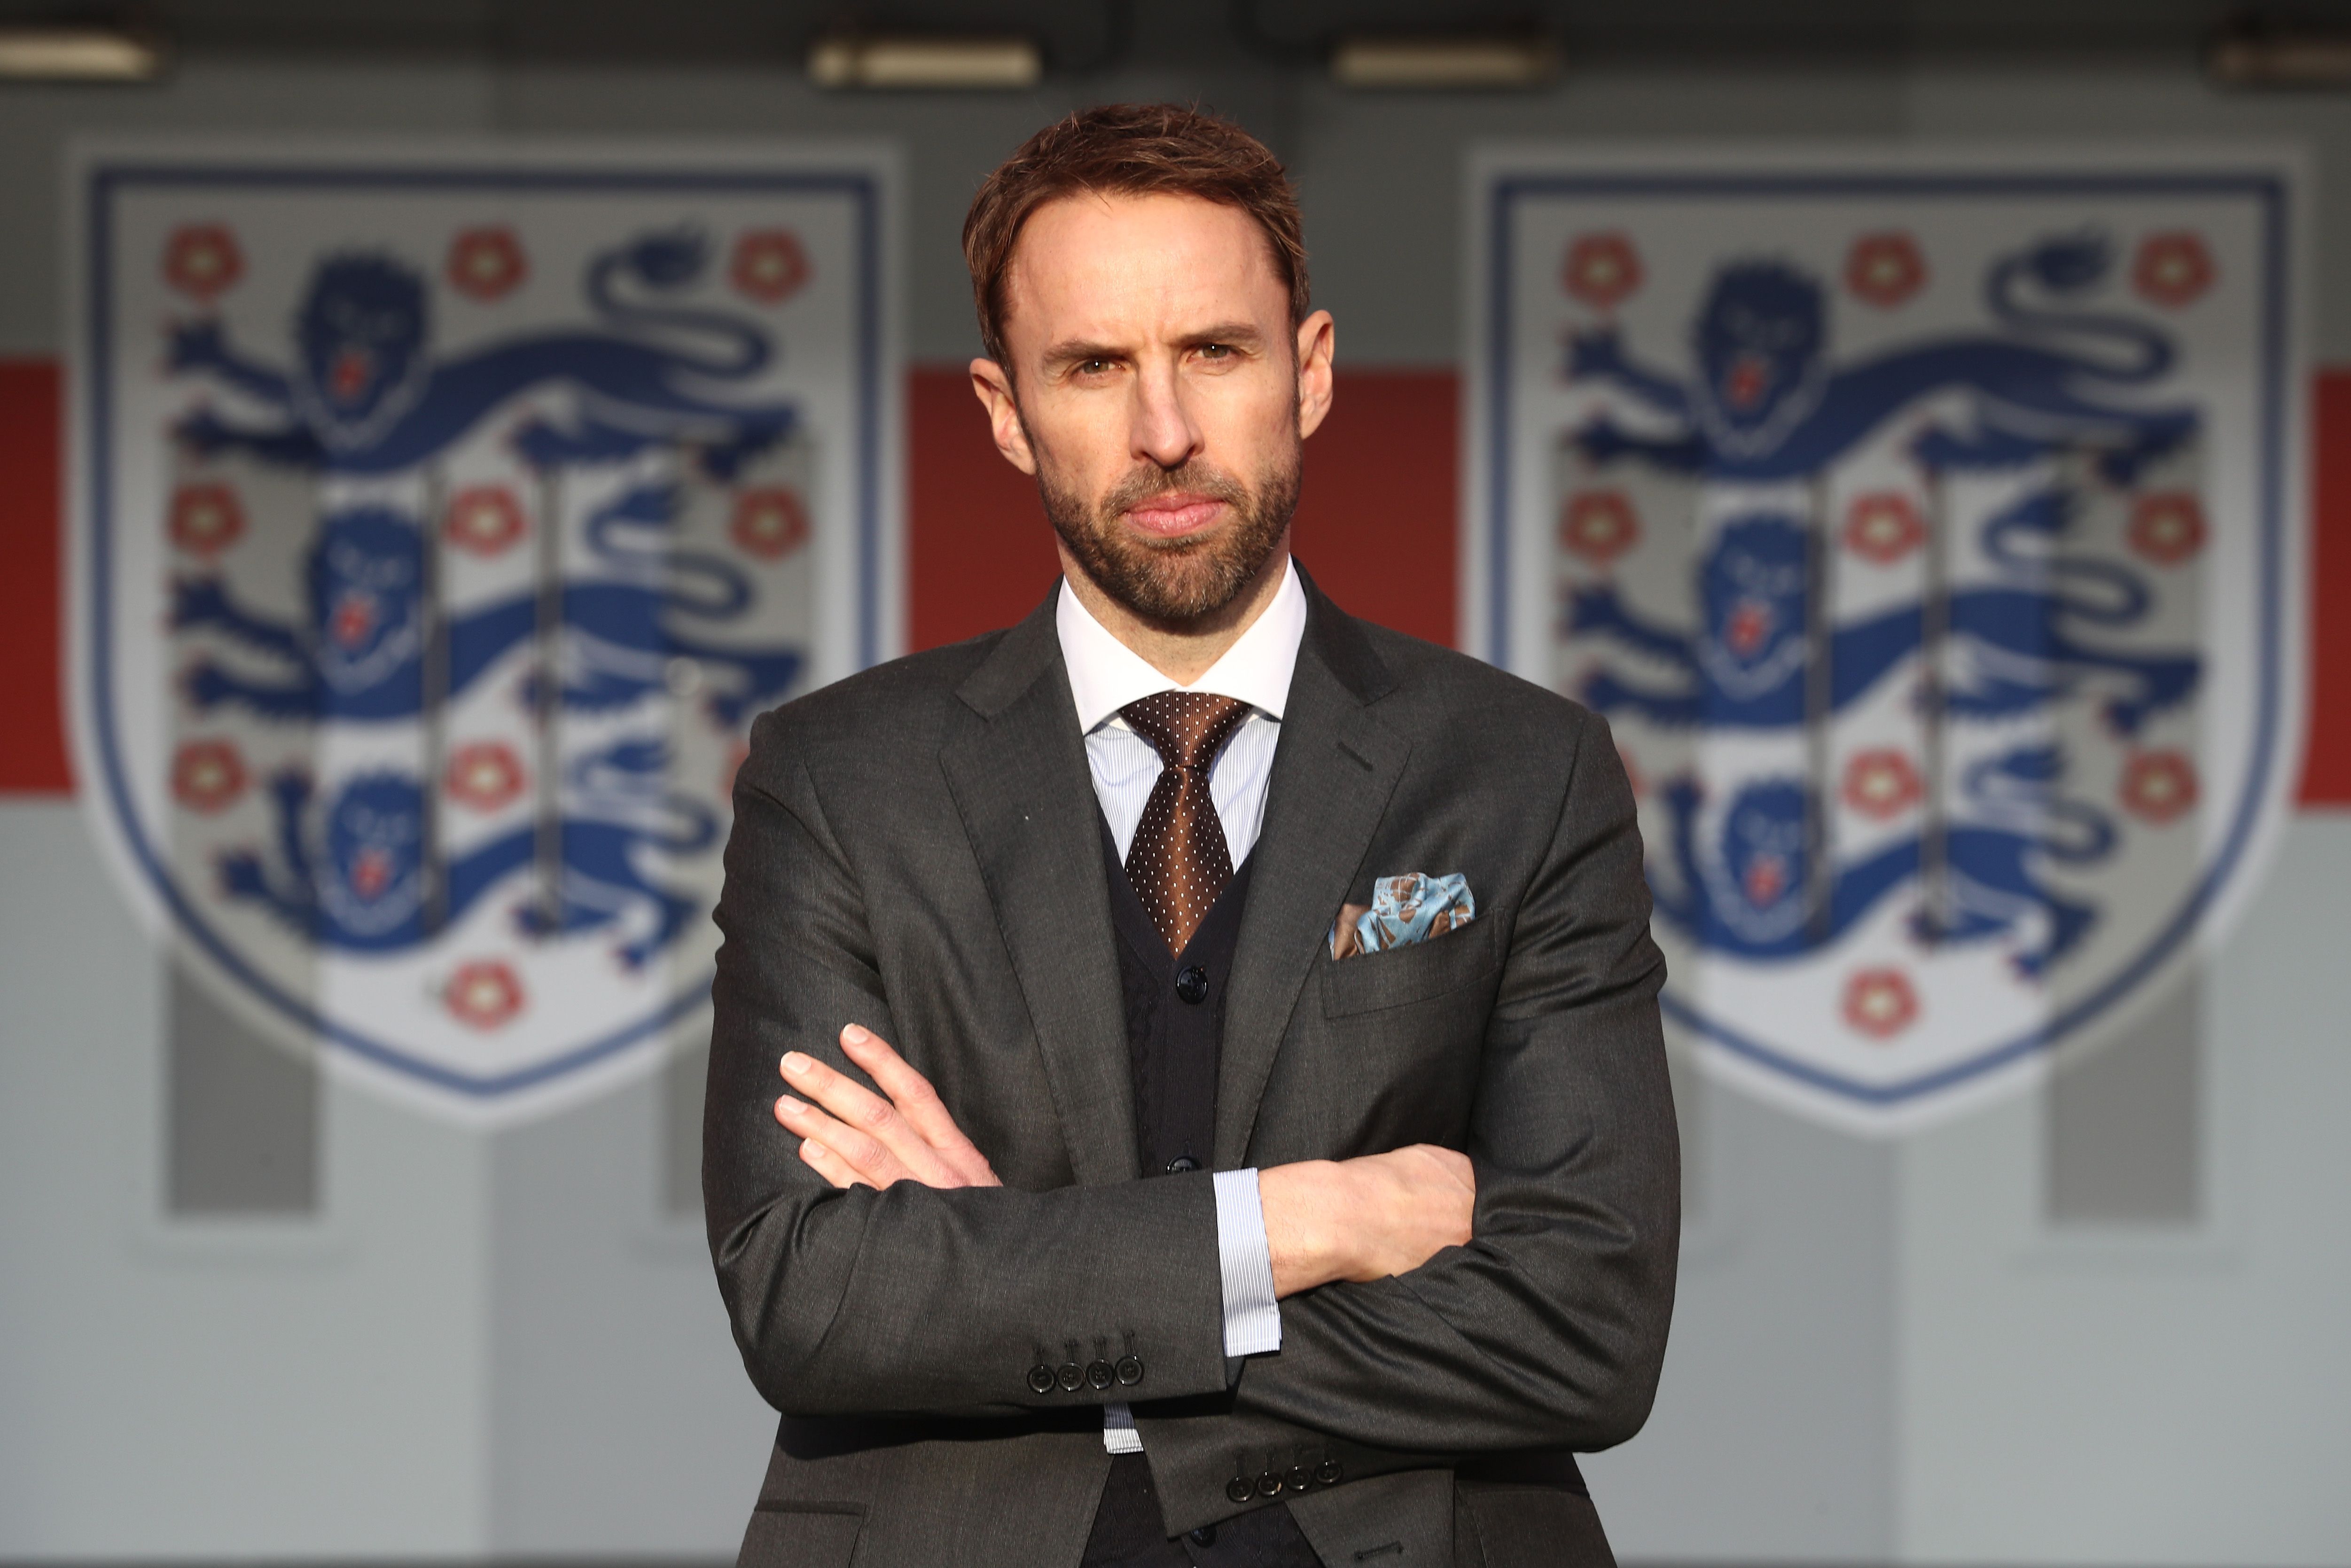 Gareth Southgate poses in front of the tunnel as he is unveiled as the new England manager at Wembley Stadium on December 1, 2016 in London, England